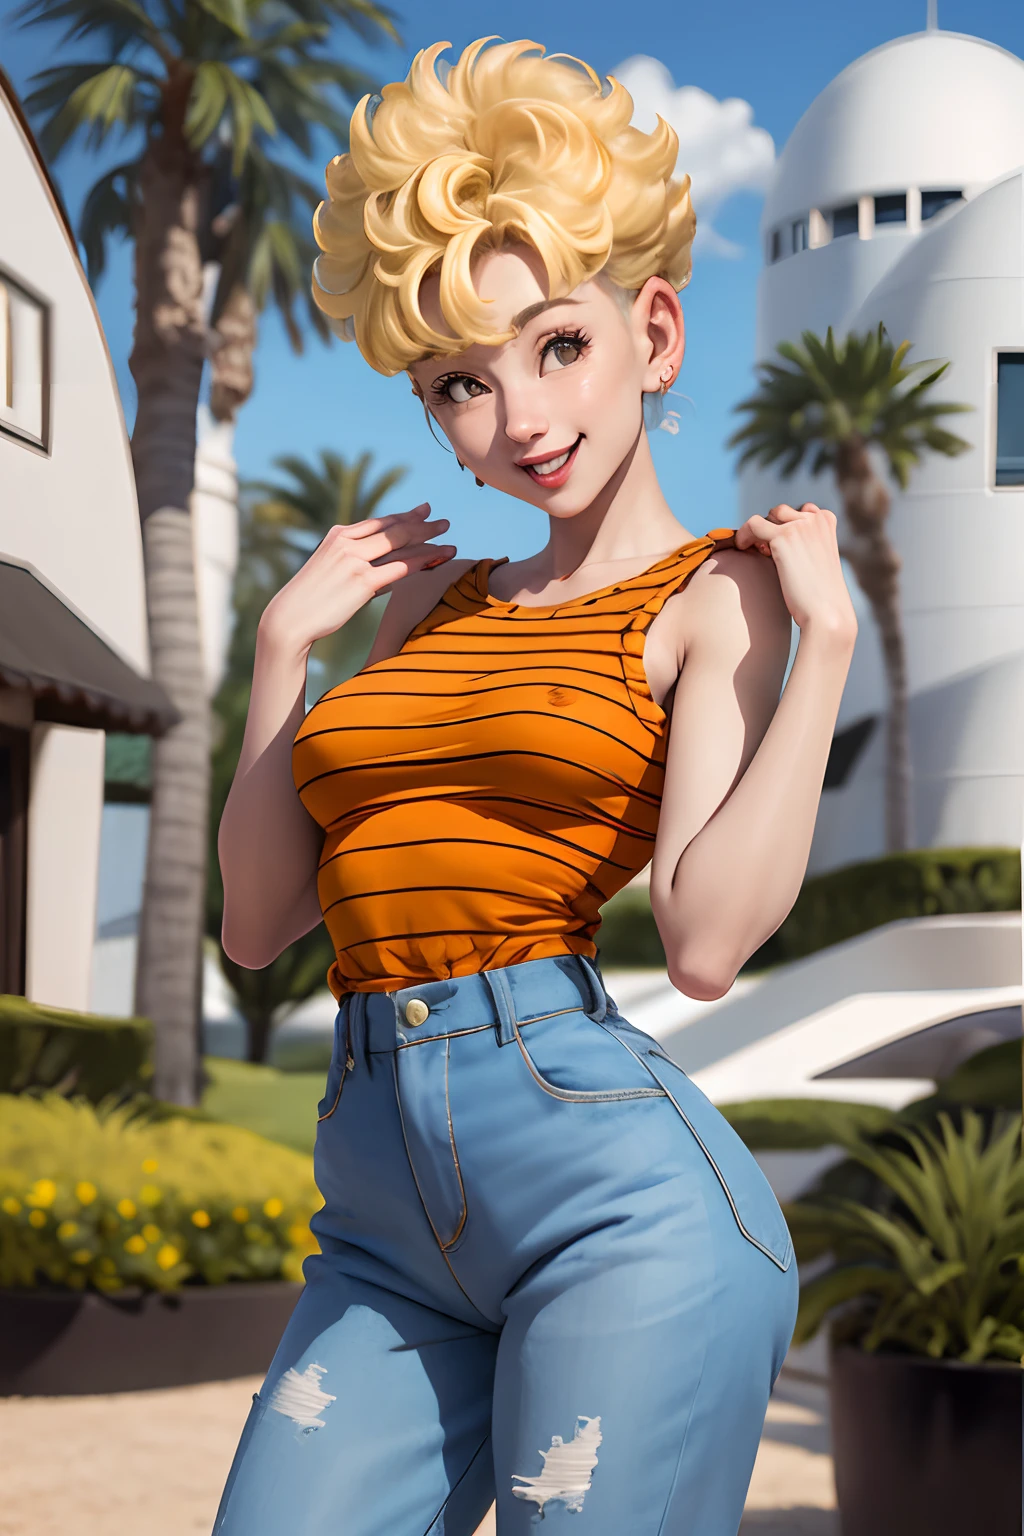 Masterpiece, Best Quality, panchy, Orange shirt, strapless, beltt, blue pants, Closed eyes, happy, SMILE, Closed mouth, big breasts, waving with one hand, watering plants